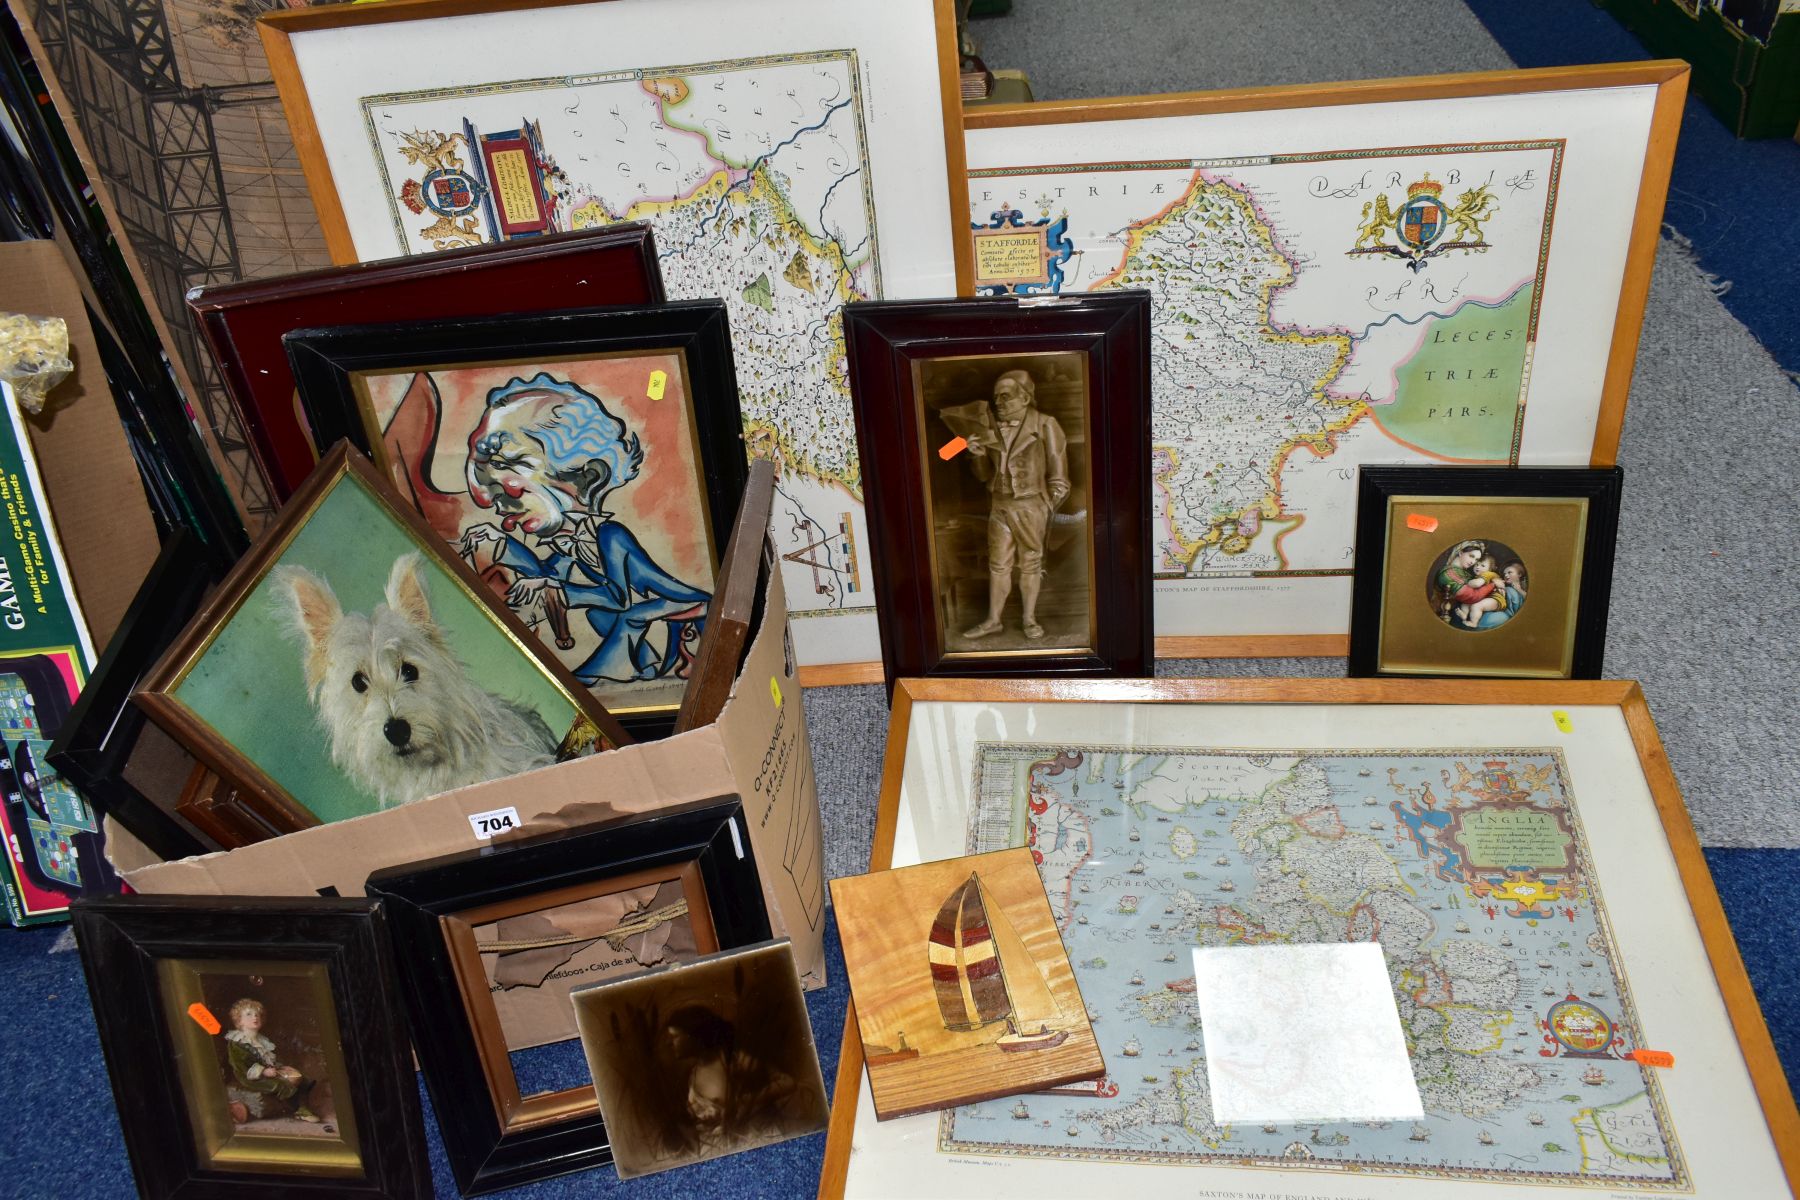 PICTURE AND PRINTS, ETC, to include a Sherwins Patent tile depicting a scantily clad female figure